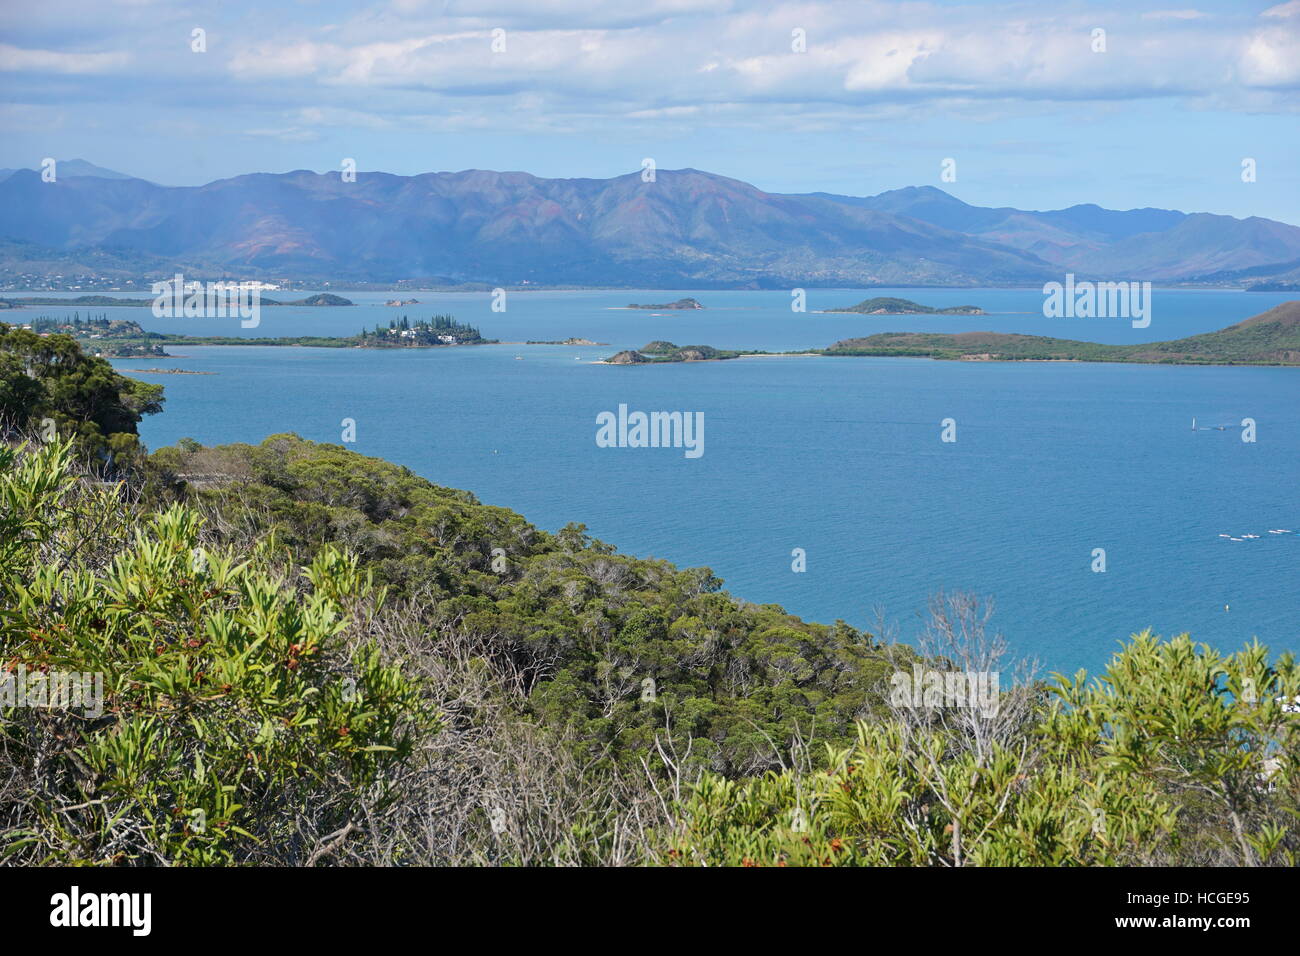 View from the Ouen Toro parc, neigbouring islands of Noumea city, Grande Terre, New Caledonia, south Pacific Stock Photo